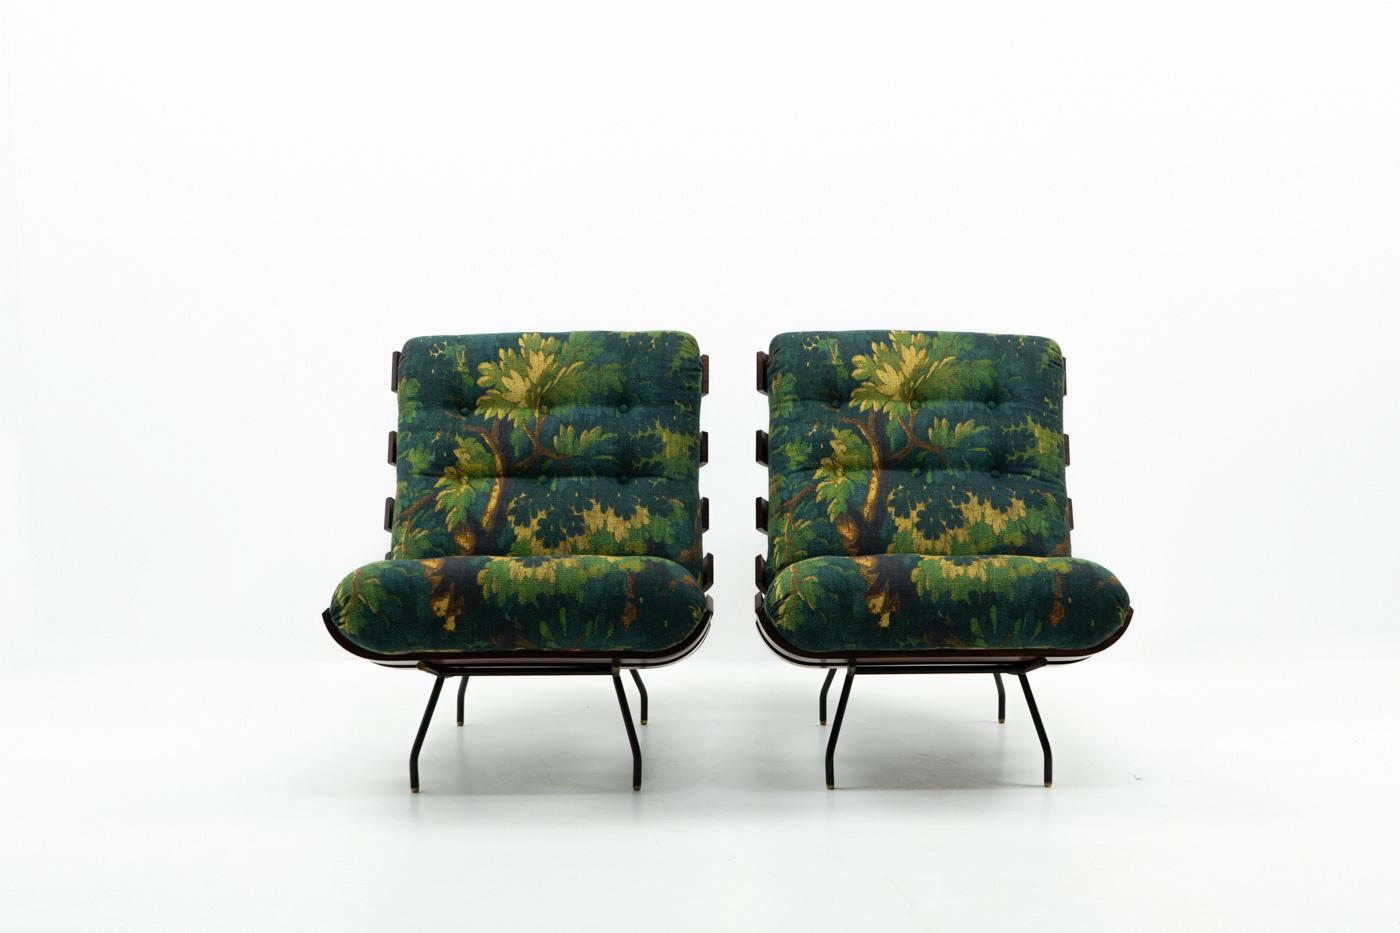 Mid-Century Modern Brazilian Design Costela Lounge Chairs by Hauner & Eisler for Forma, 1950s For Sale